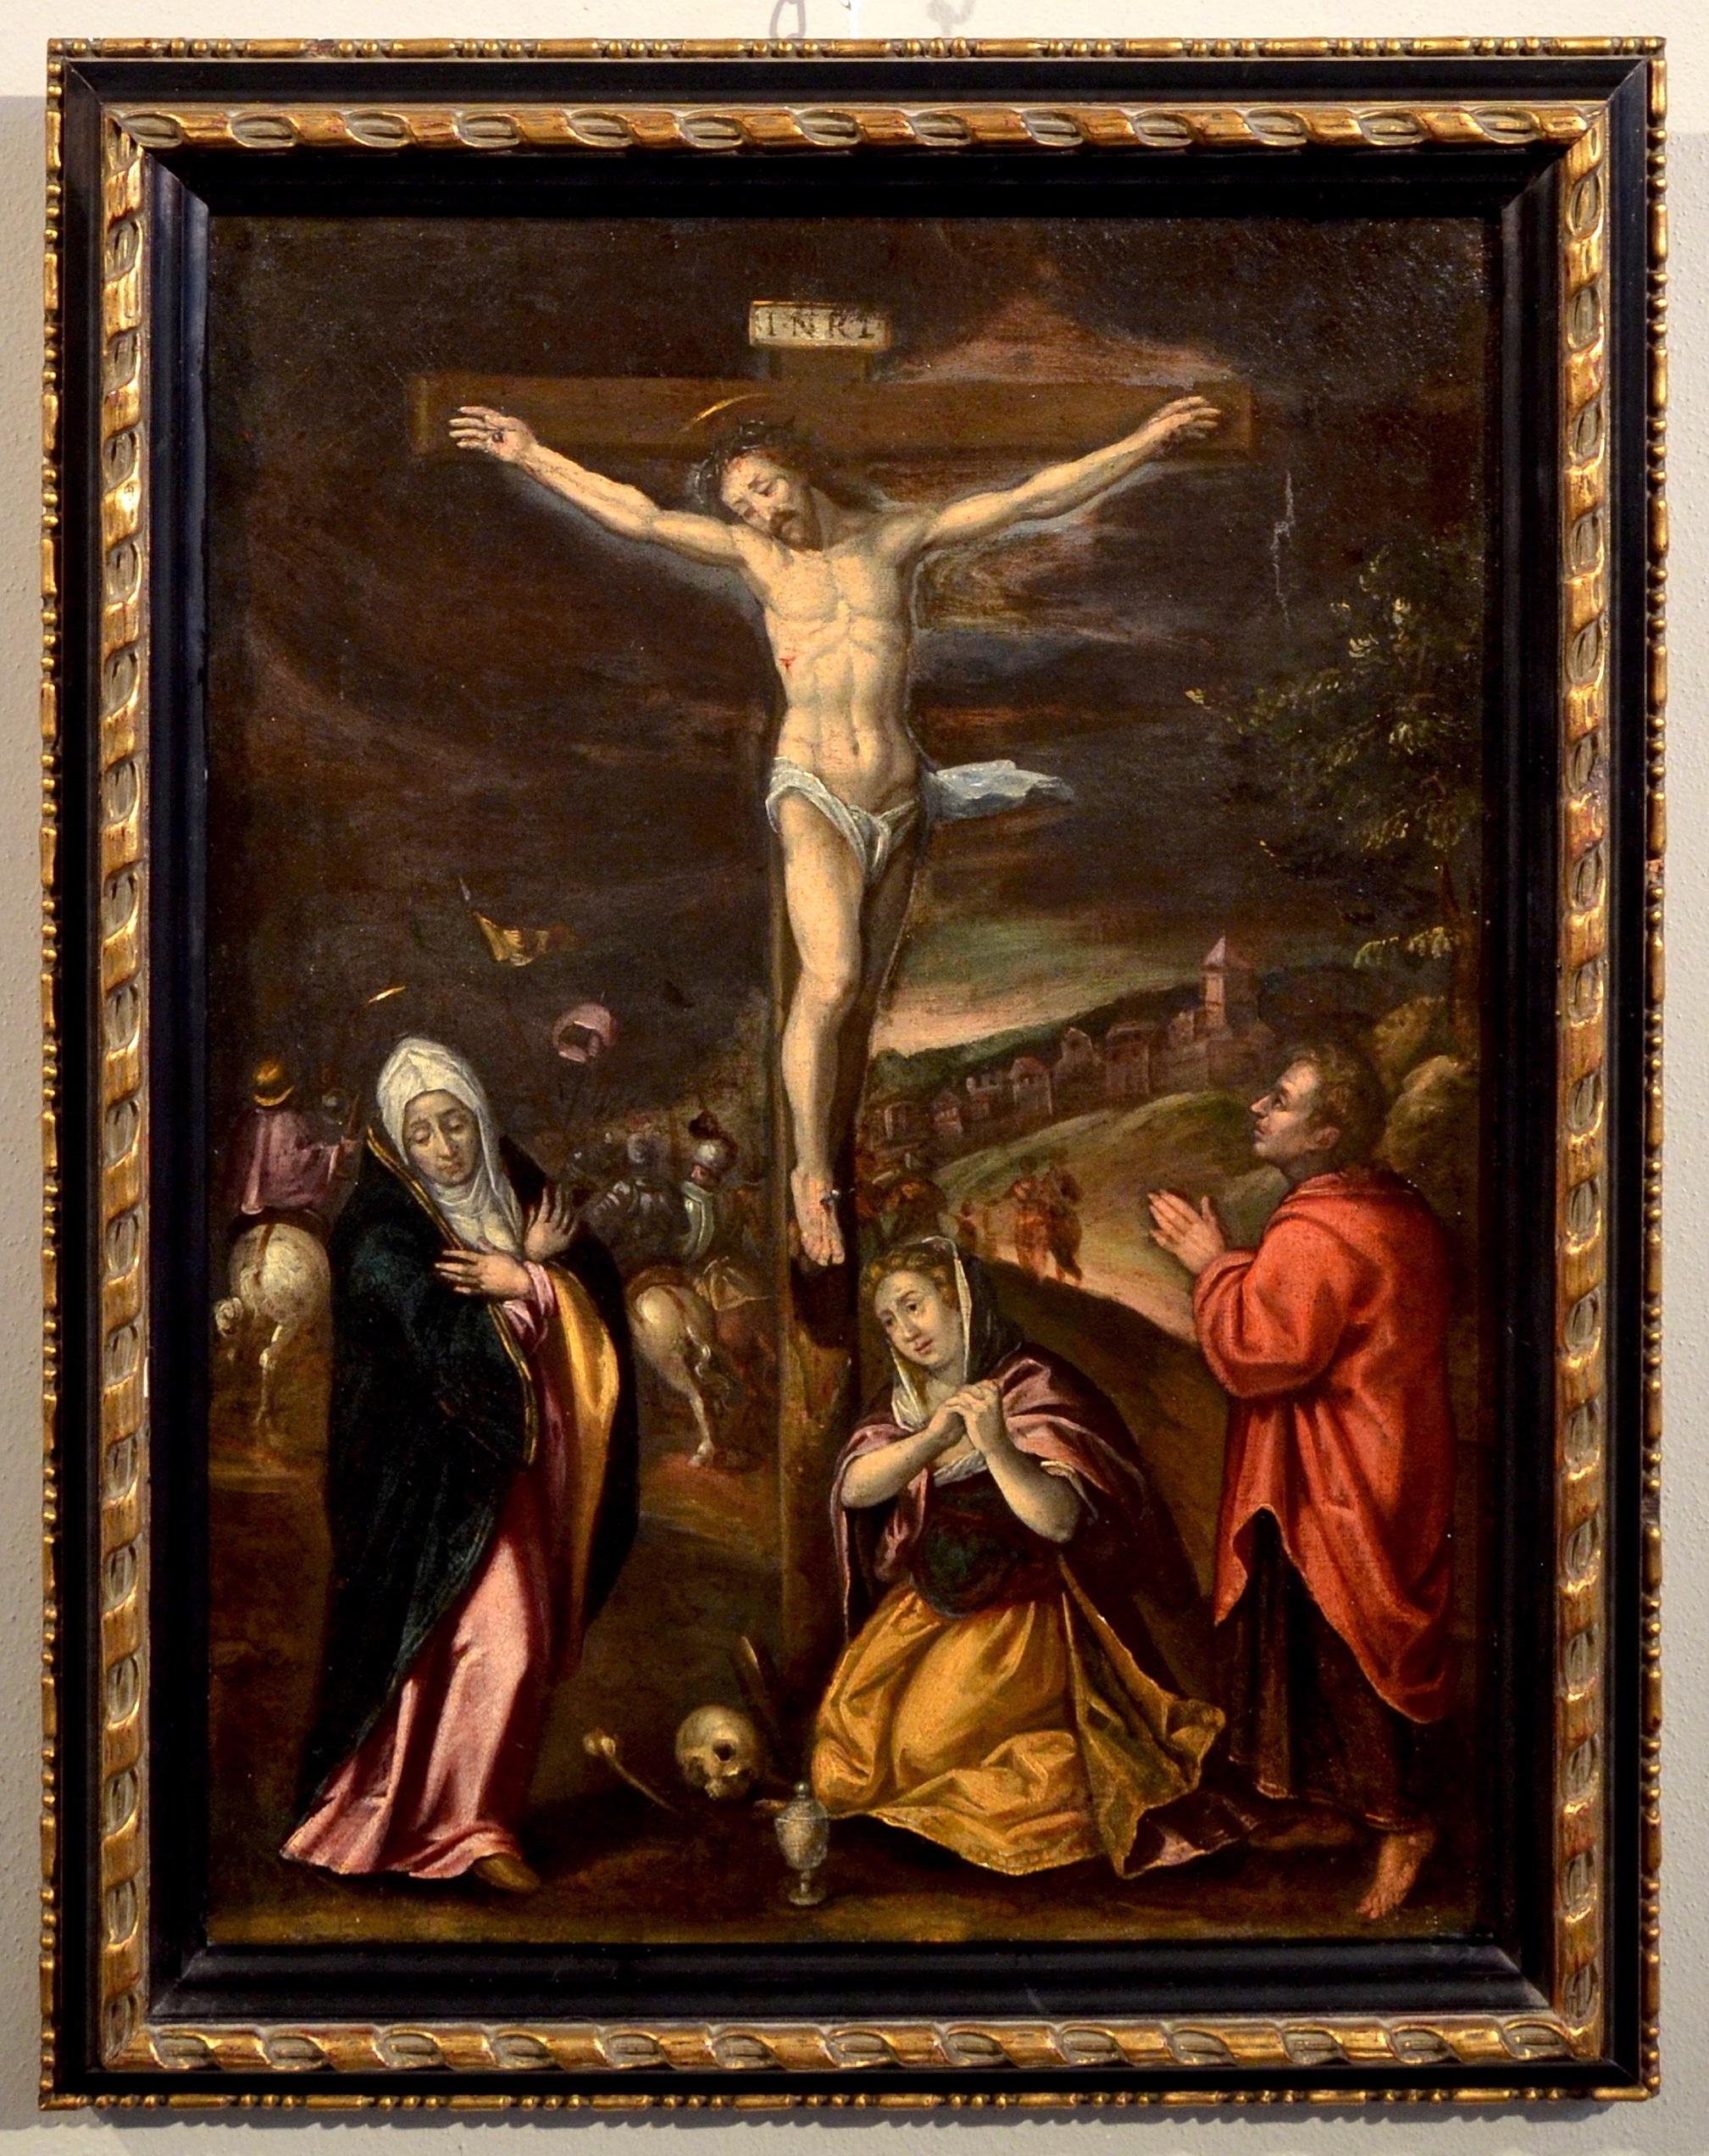 Flemish Paint Oil on canvas 16/17th Century Crucifixion Christ Old master  - Painting by Flemish master late 16th - early 17th century